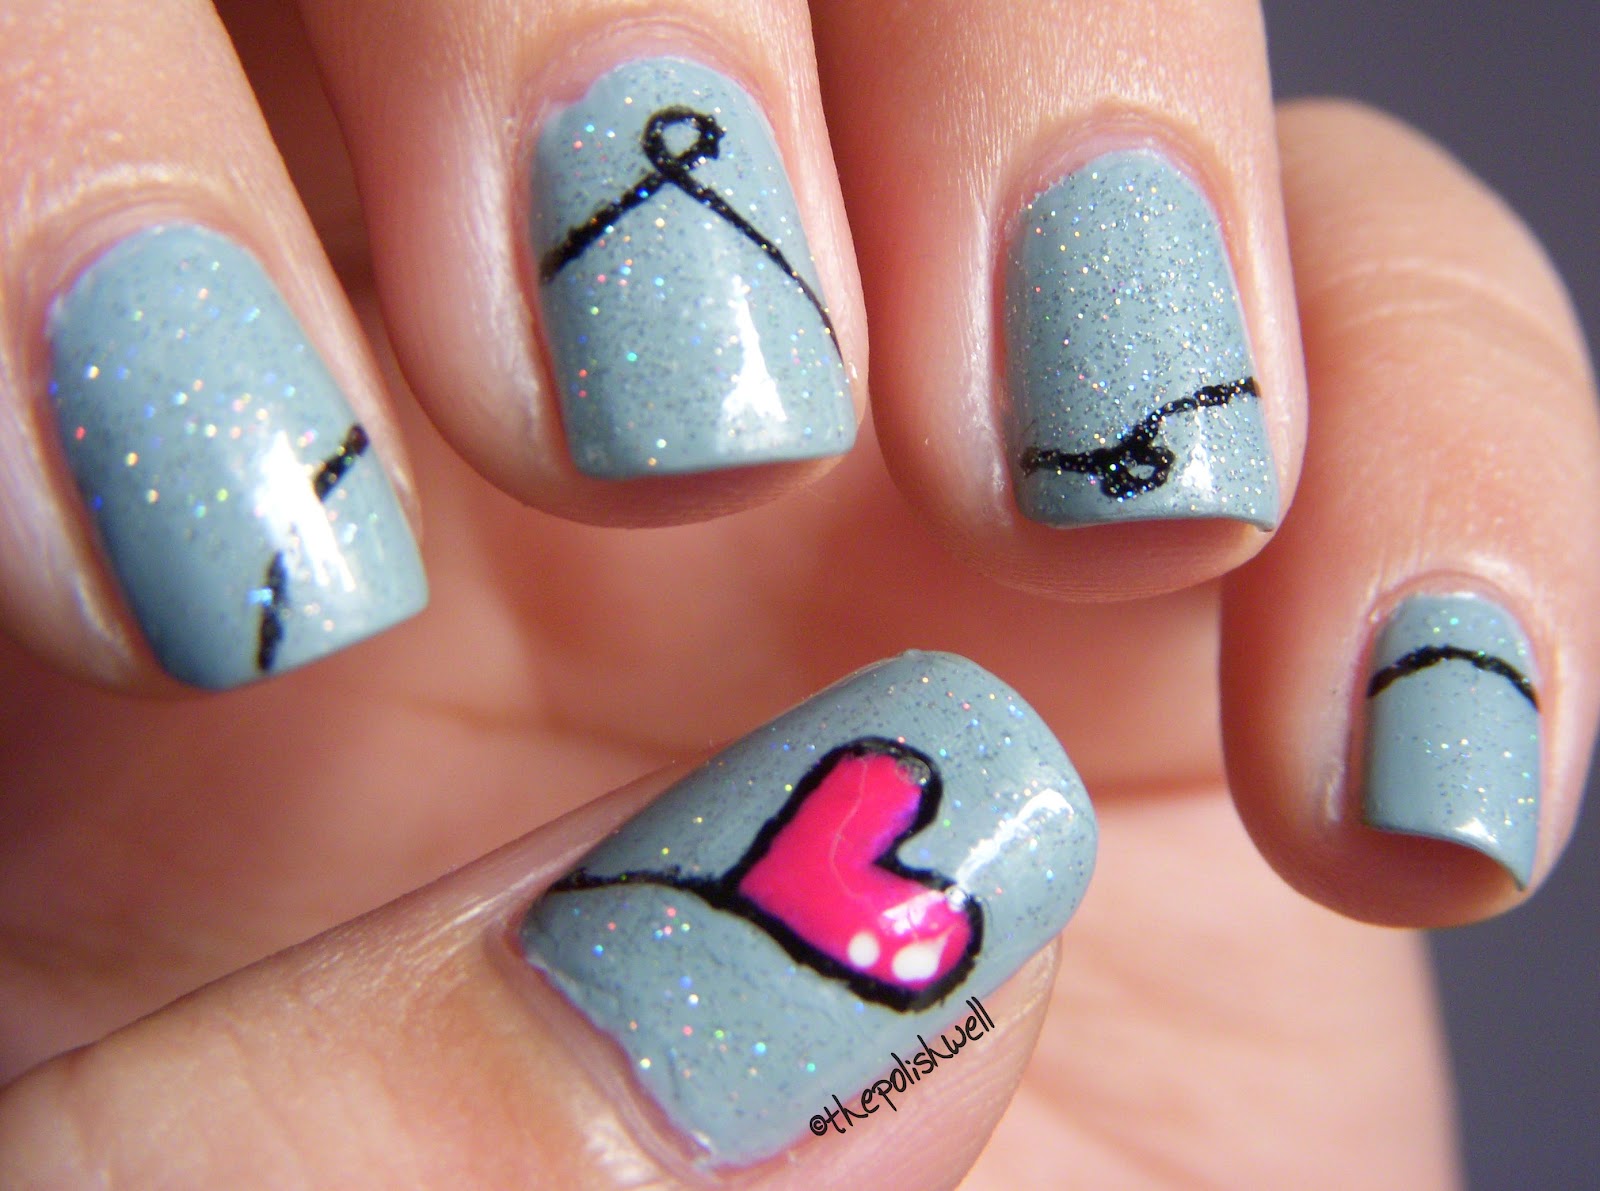 3. Heart Nail Art Ideas for a Loving Look - wide 4